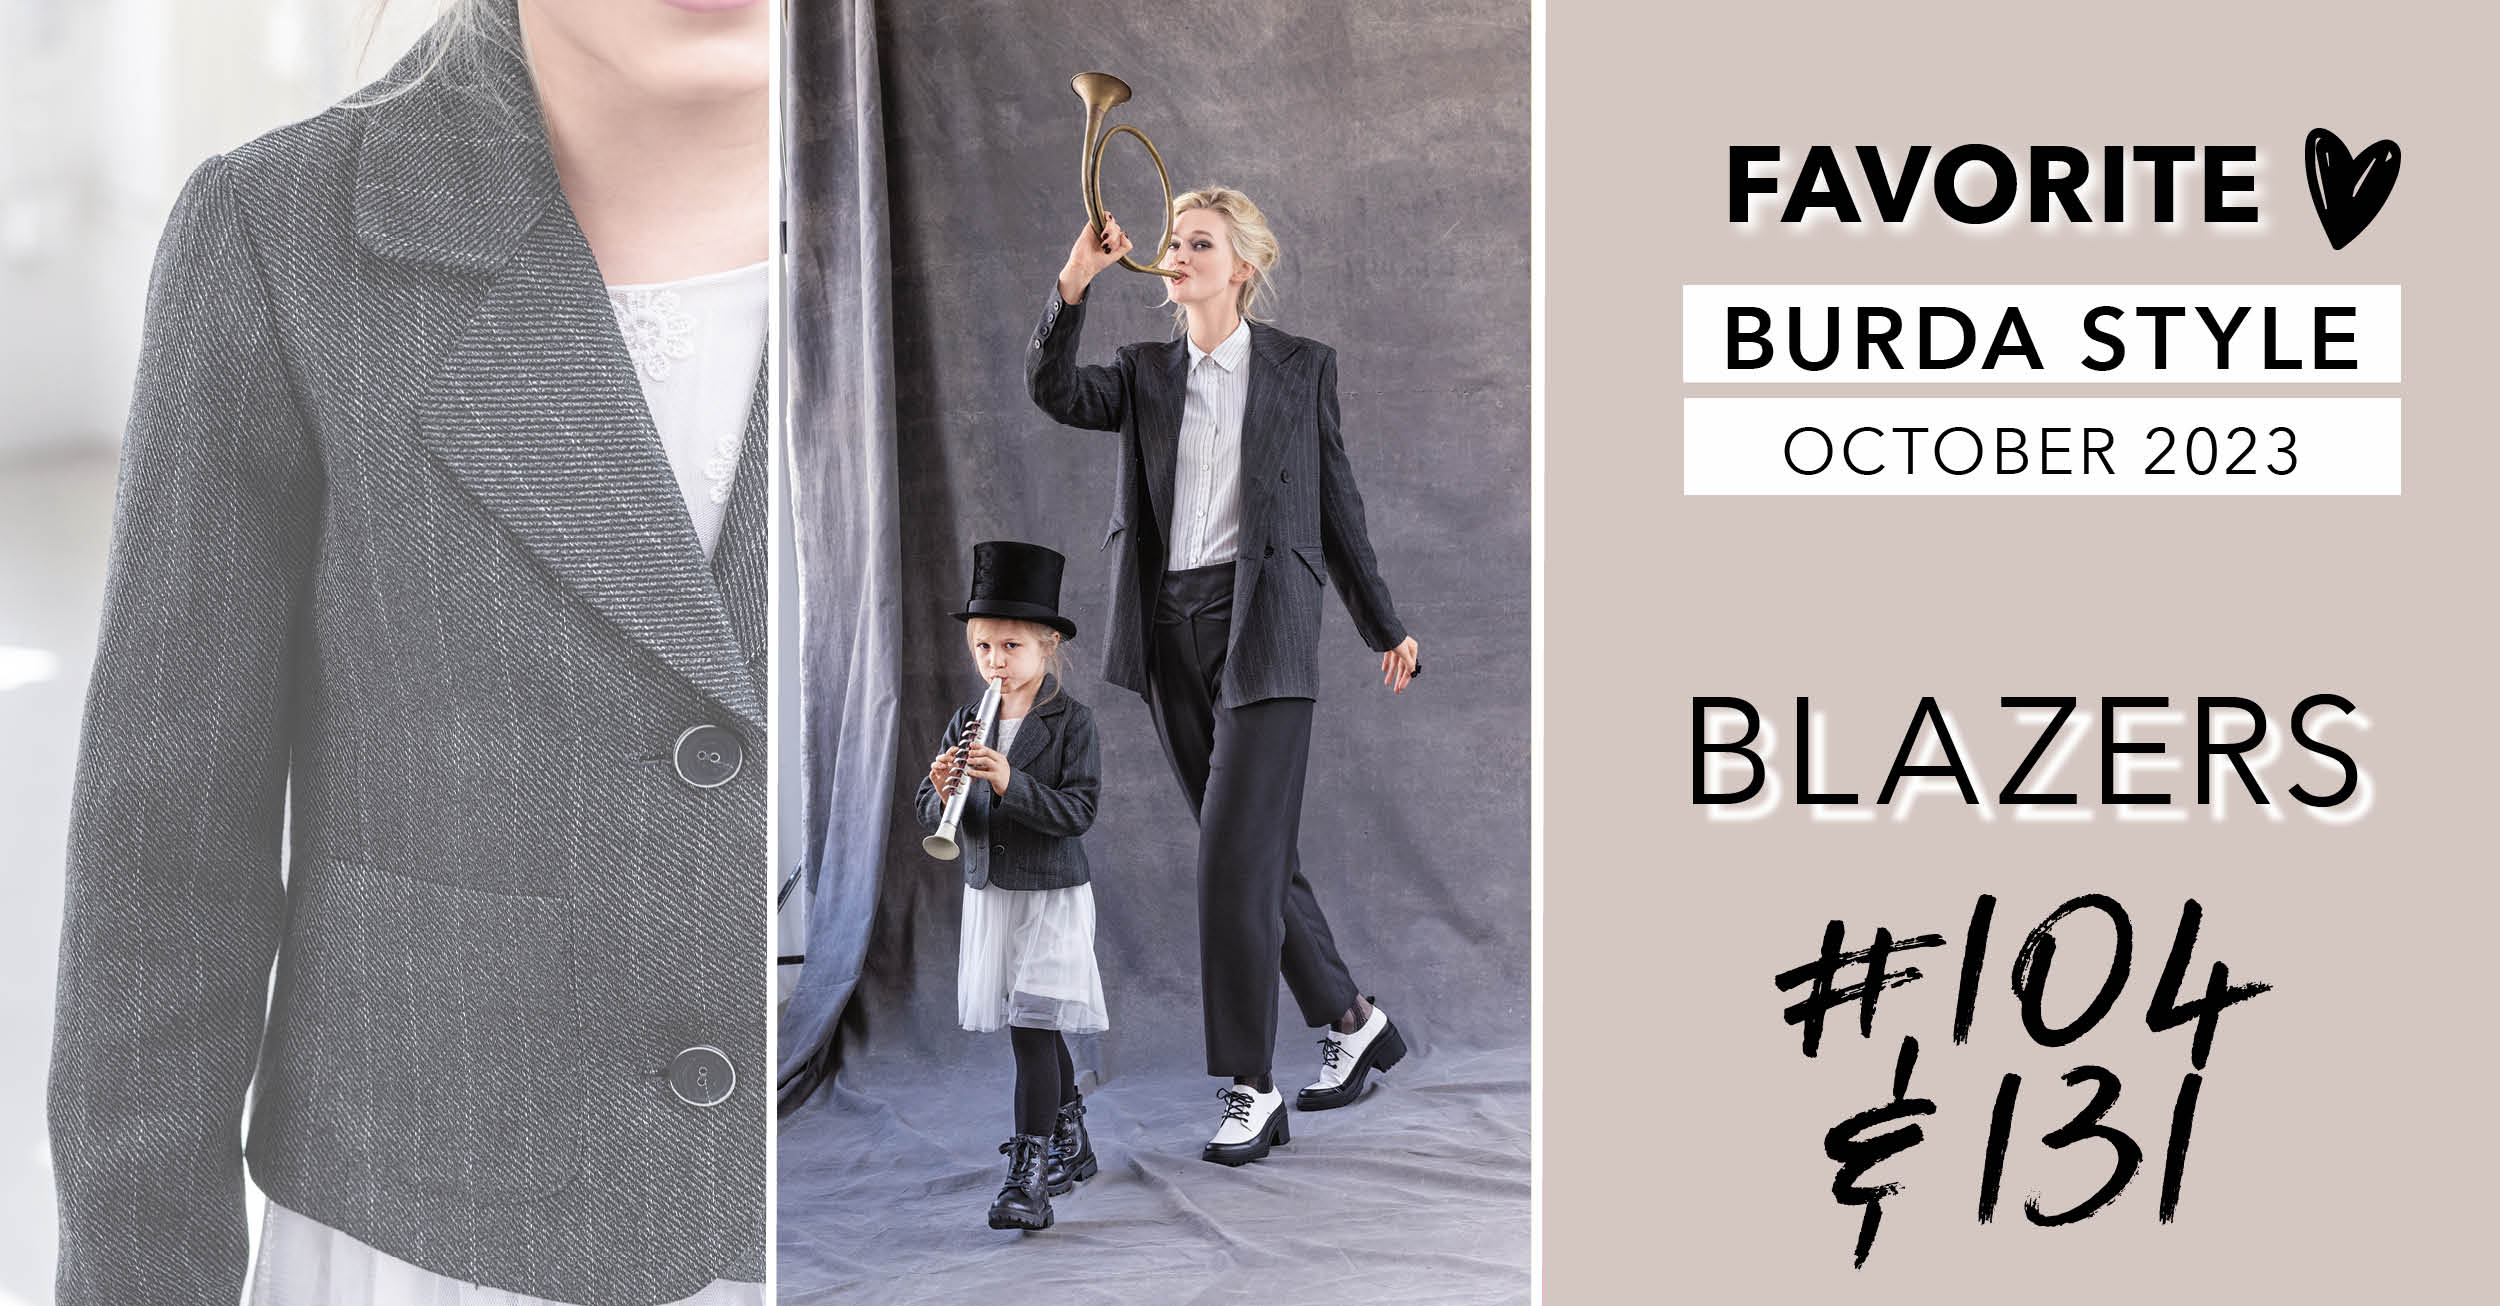 Favorites: Blazers 104 and 131 from Burda Style October 2023 